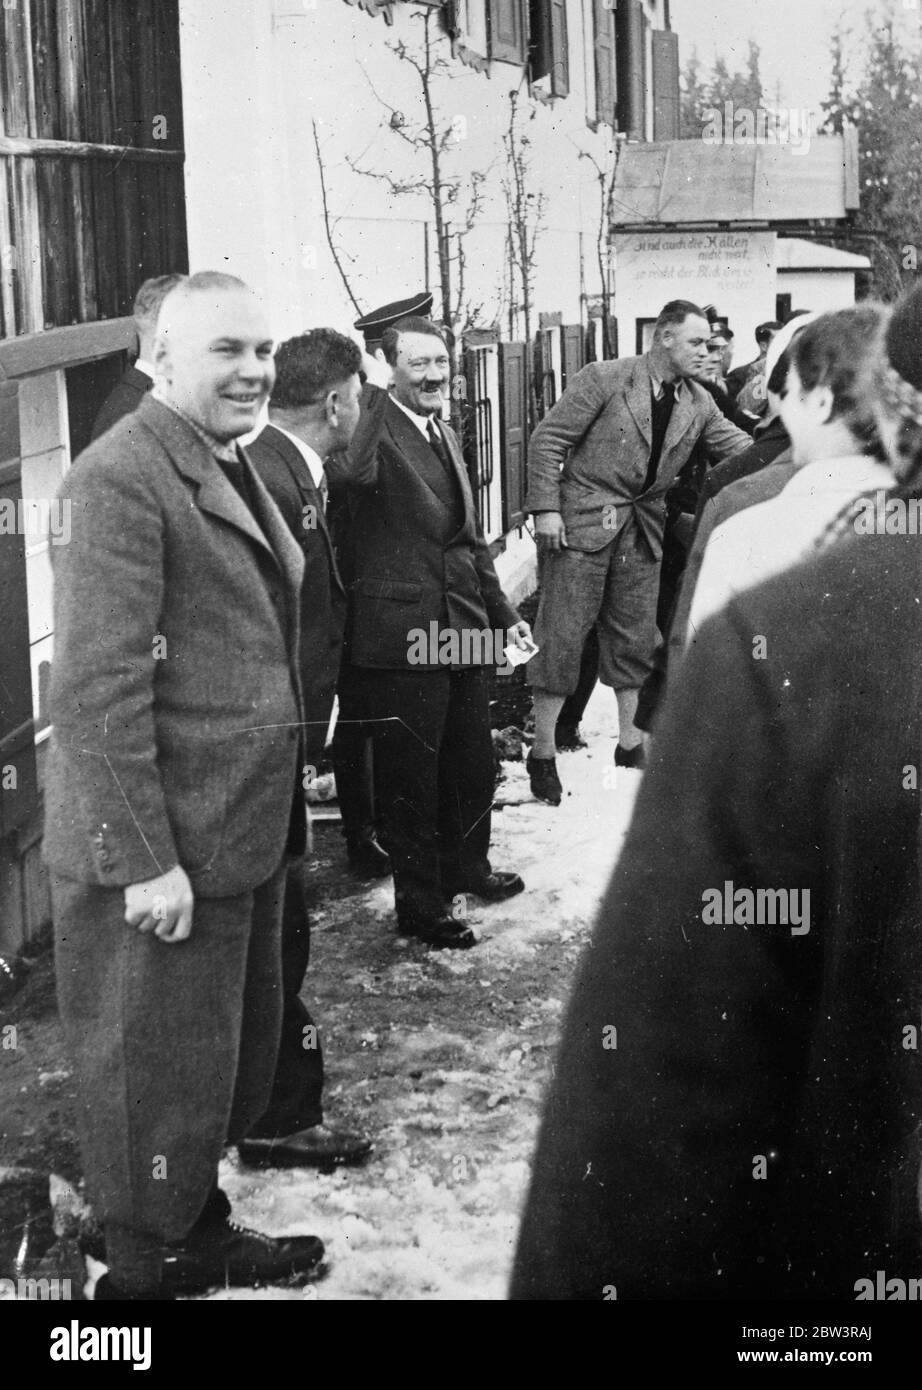 Hitler as winter sports fan . Chancellor Hitler visited Berchtesgaden in the Bavarian highlands to watch the winter sports meeting of the Nazi ' Strength through Joy ' movement . Photo shows , Hitler smilingly lifts his arm in the Nazi salute at the meeting . 31 December 1935 Stock Photo